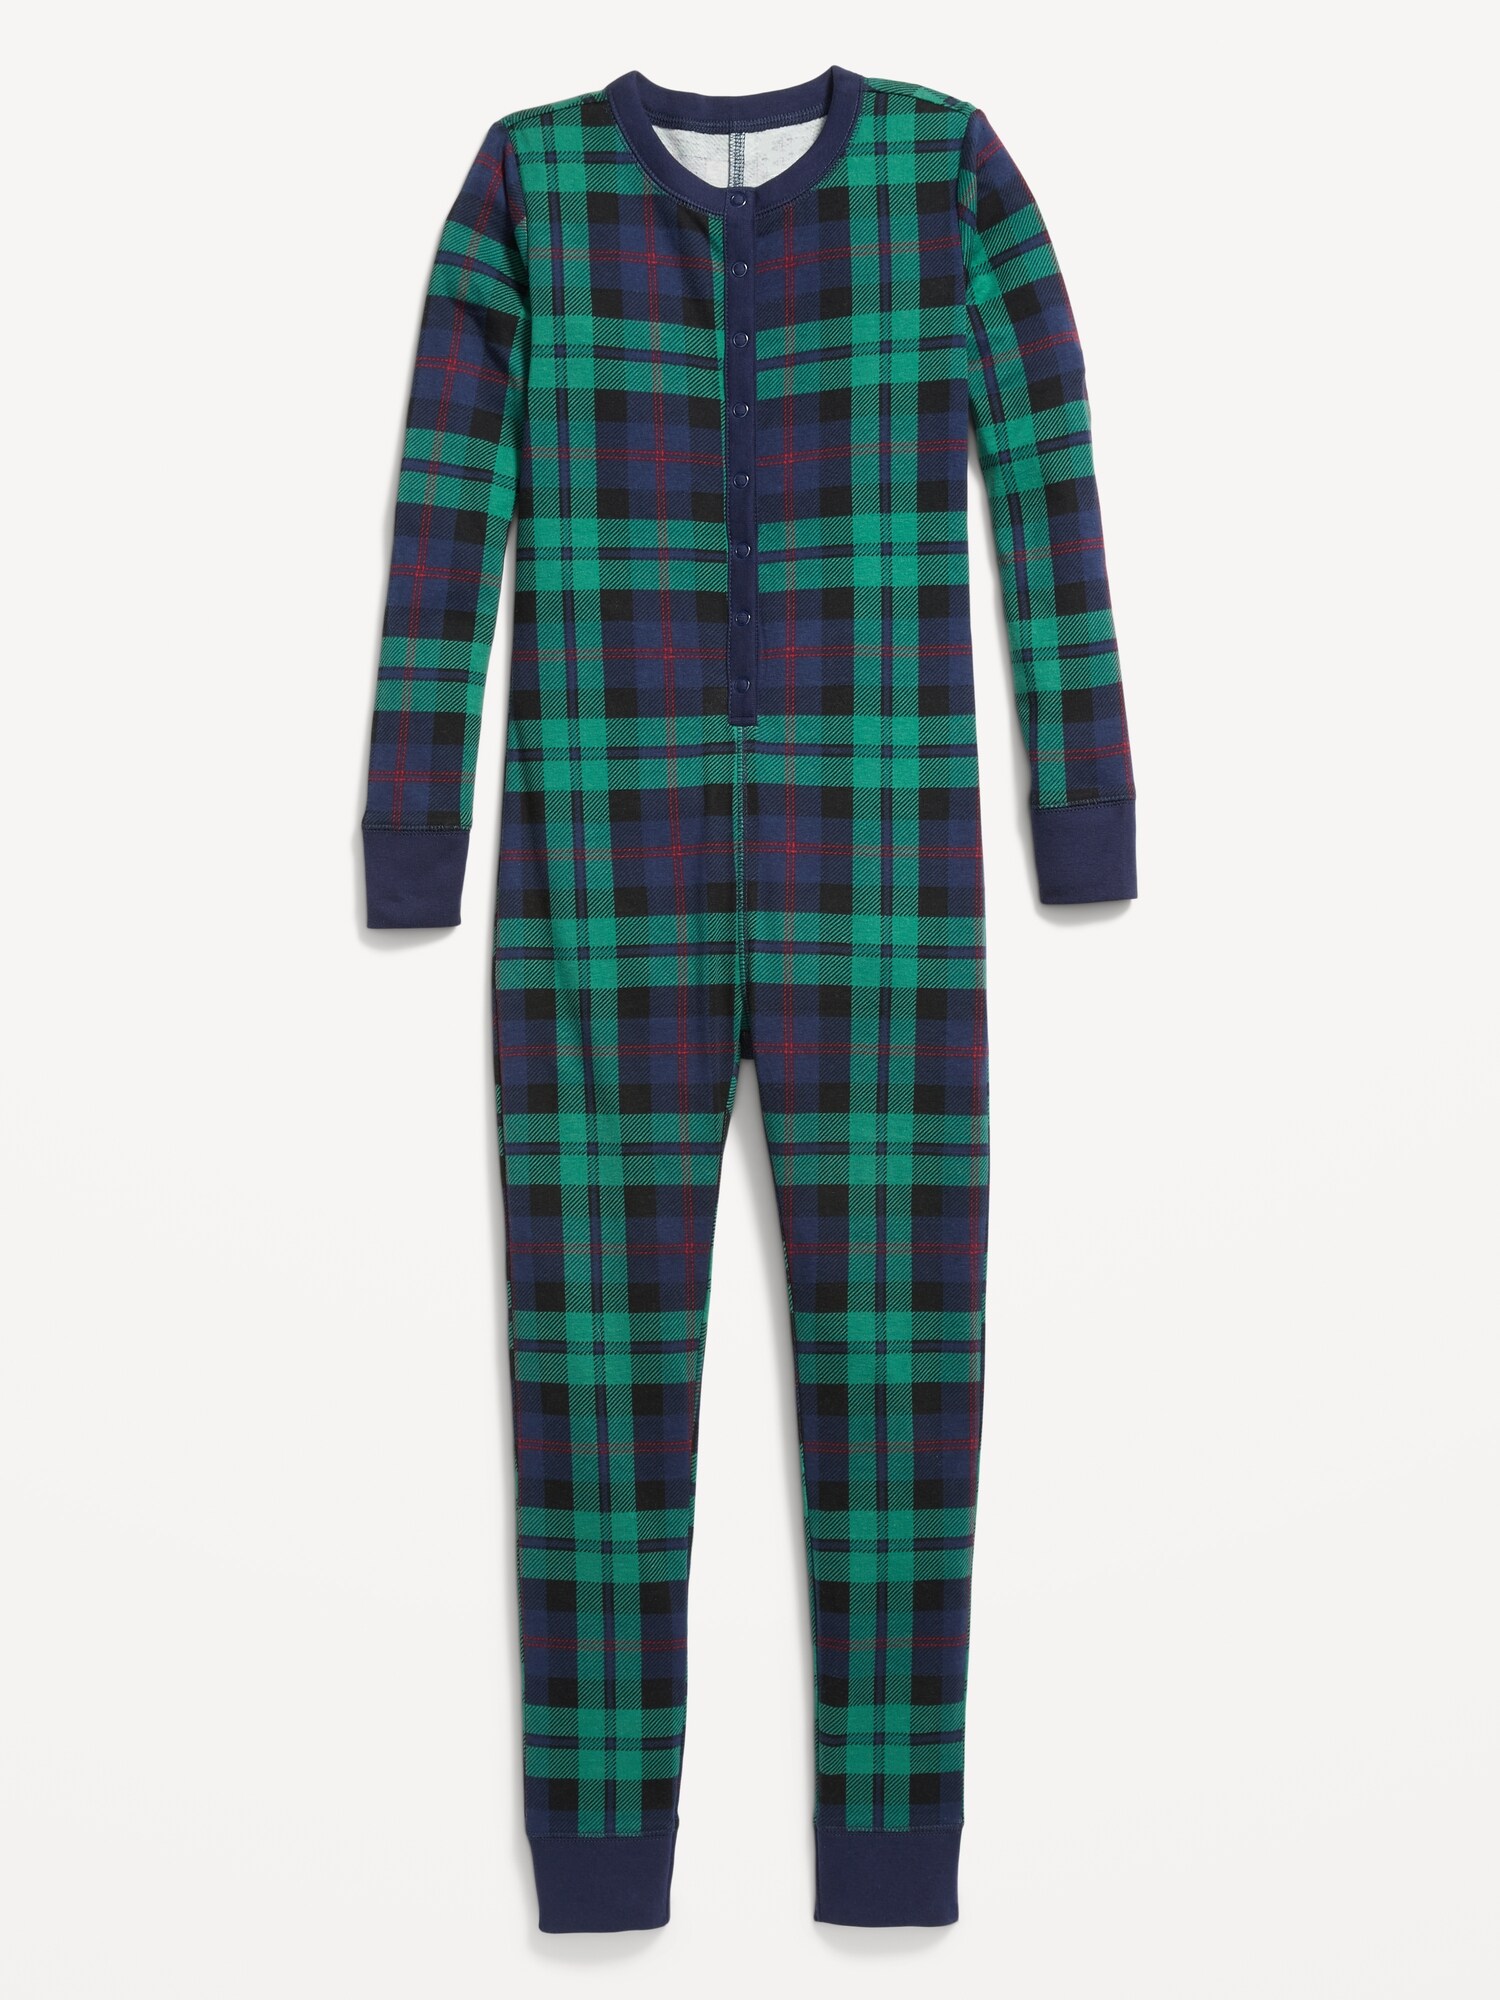 Gender-Neutral Matching Print Snug-Fit One-Piece Pajamas for Kids